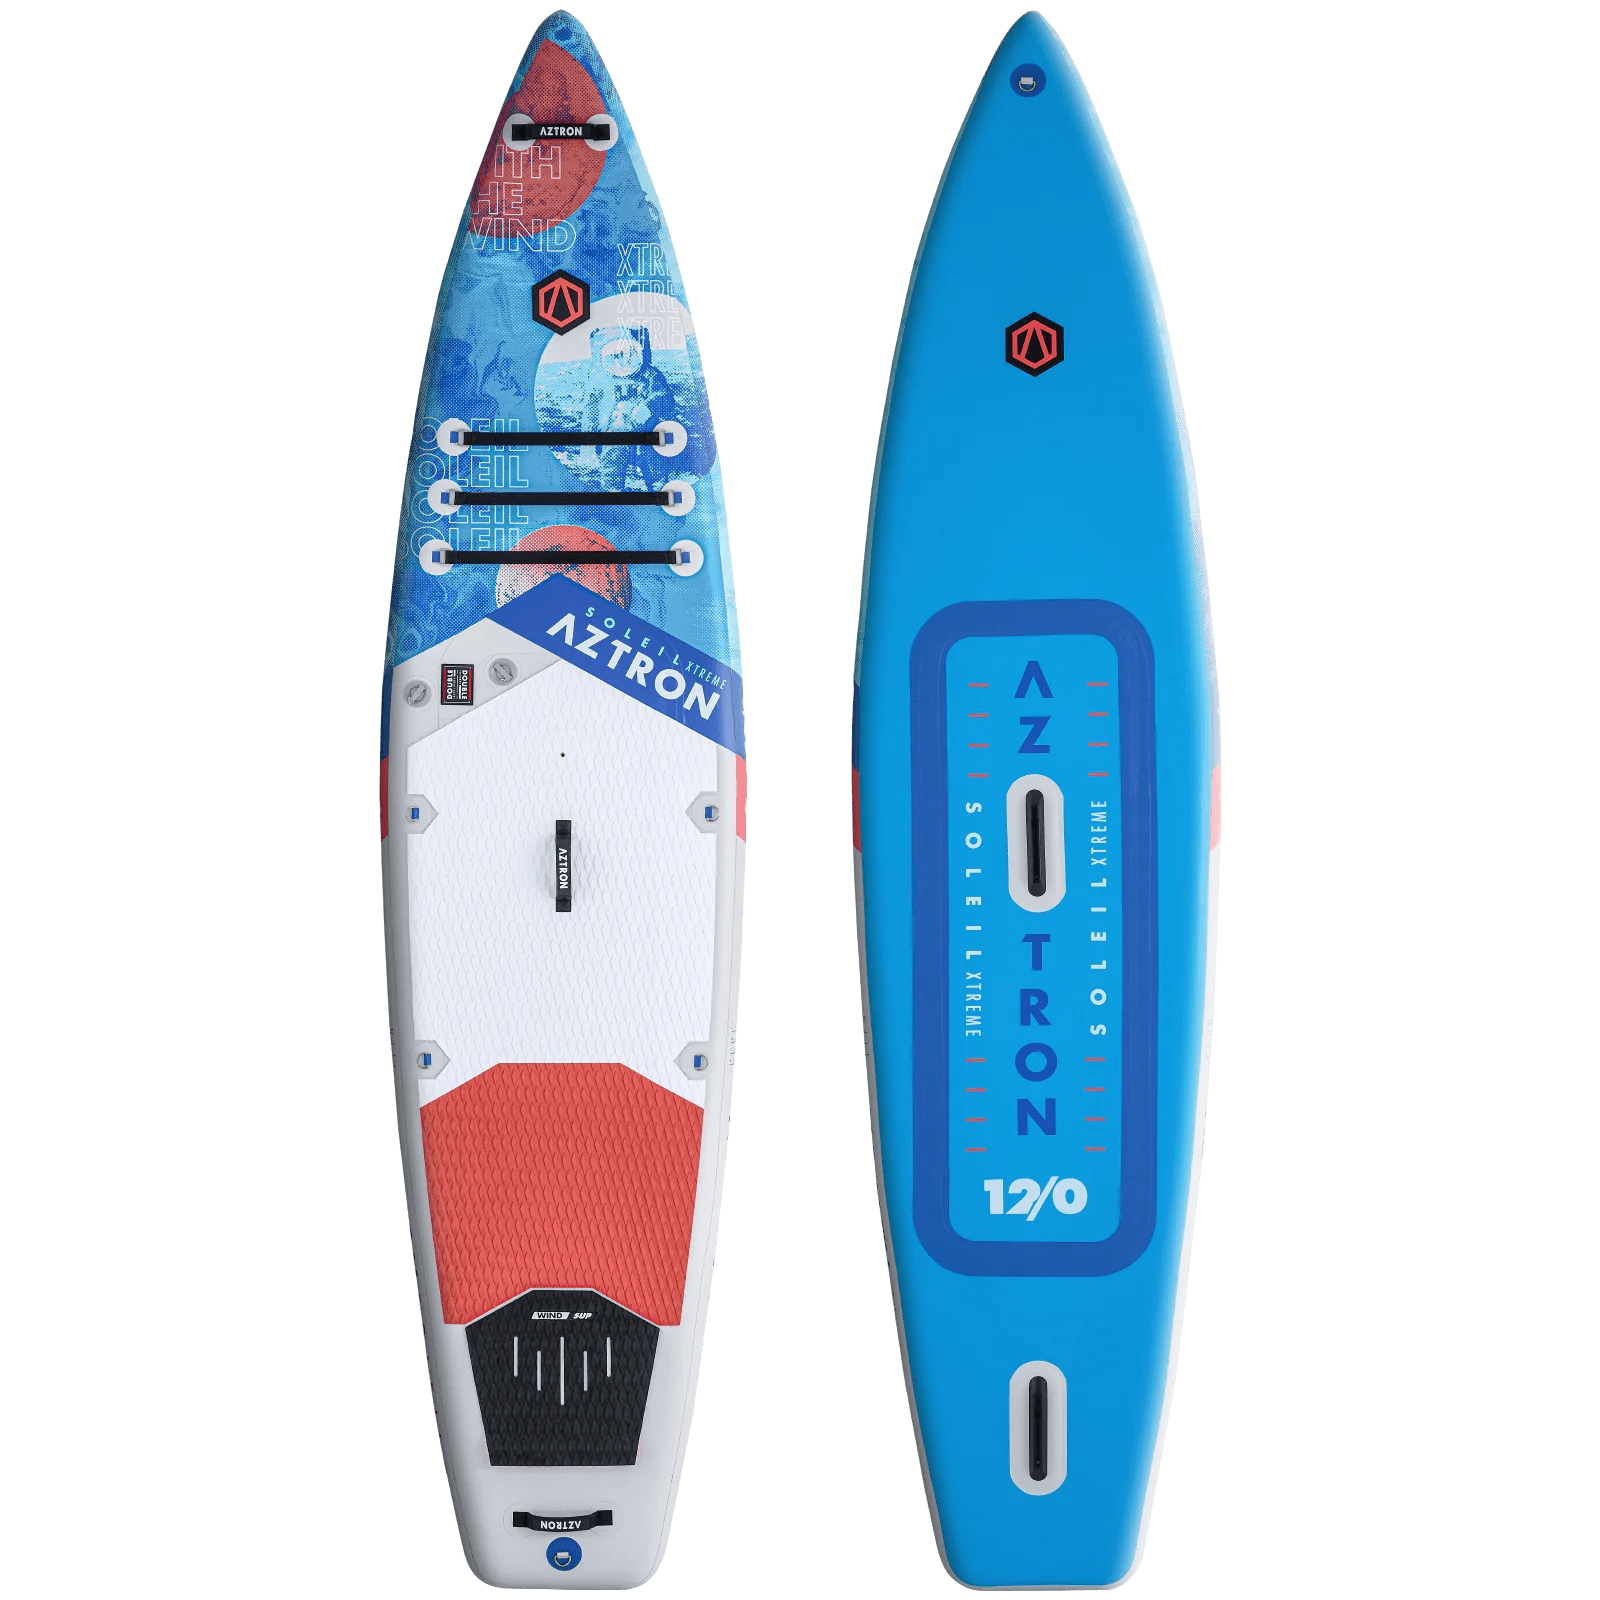 Aztron Soleil Extreme 12'0" 2023 - Worthing Watersports - SUP Inflatables - Aztron